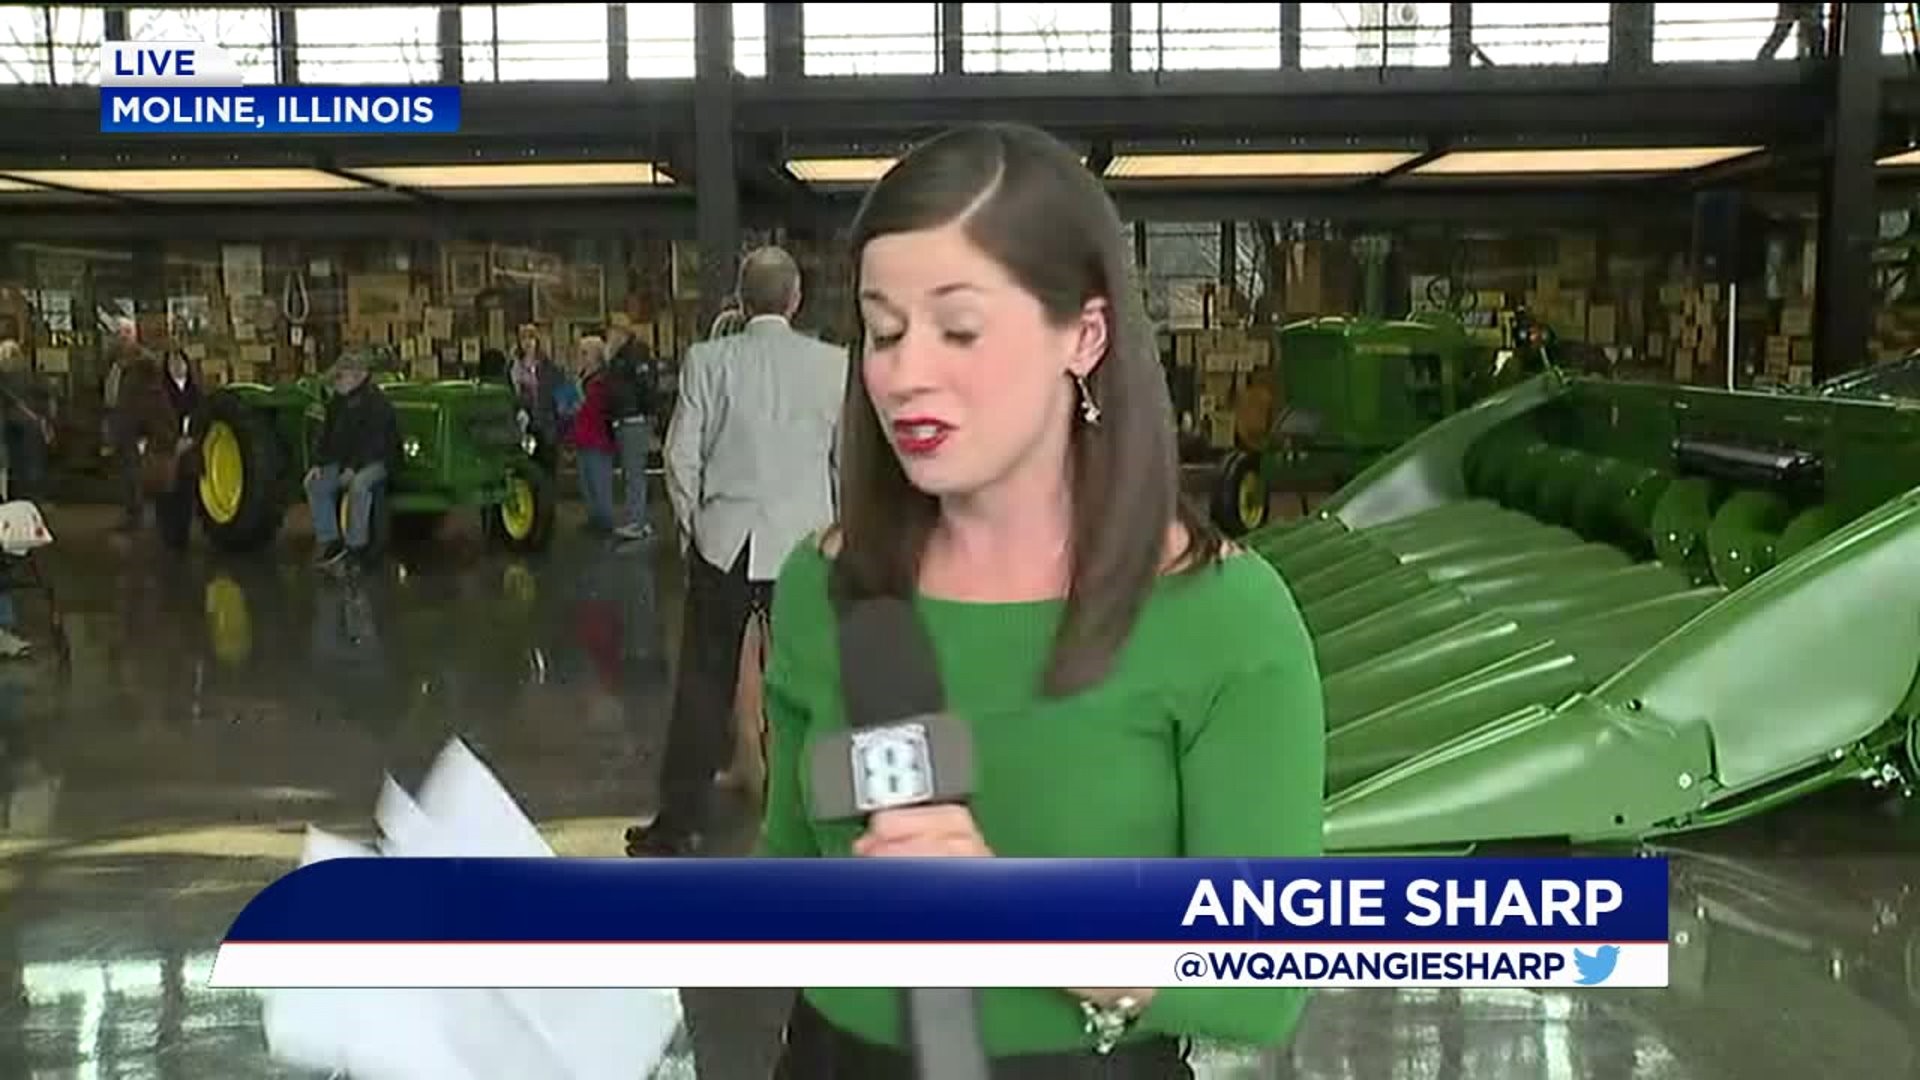 Angie previews Birdies for Charity kickoff